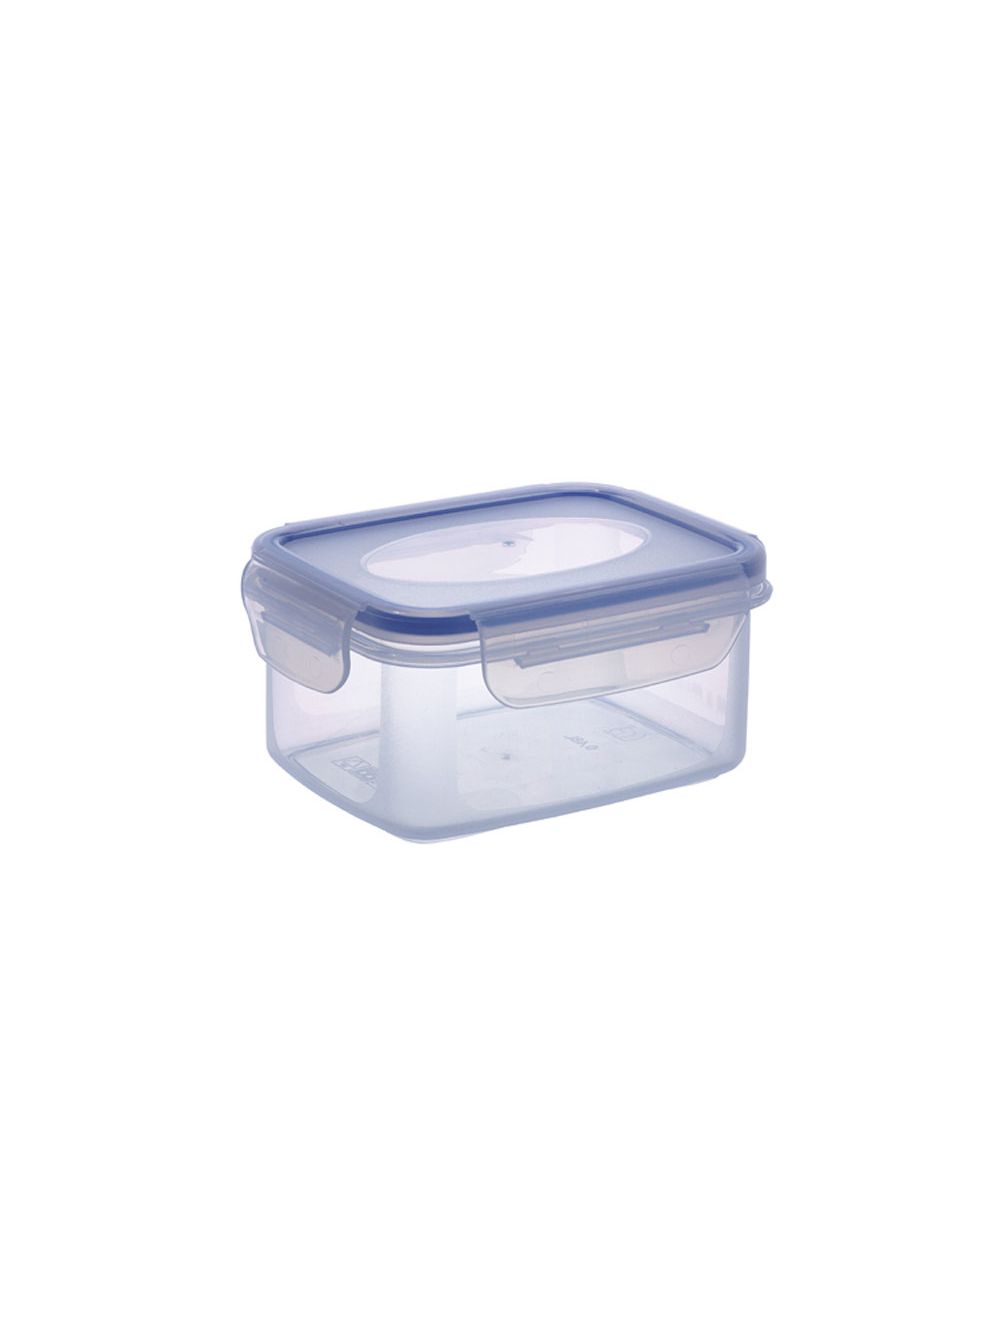 Rival Safe Box Rectangle 0.48L - Assorted